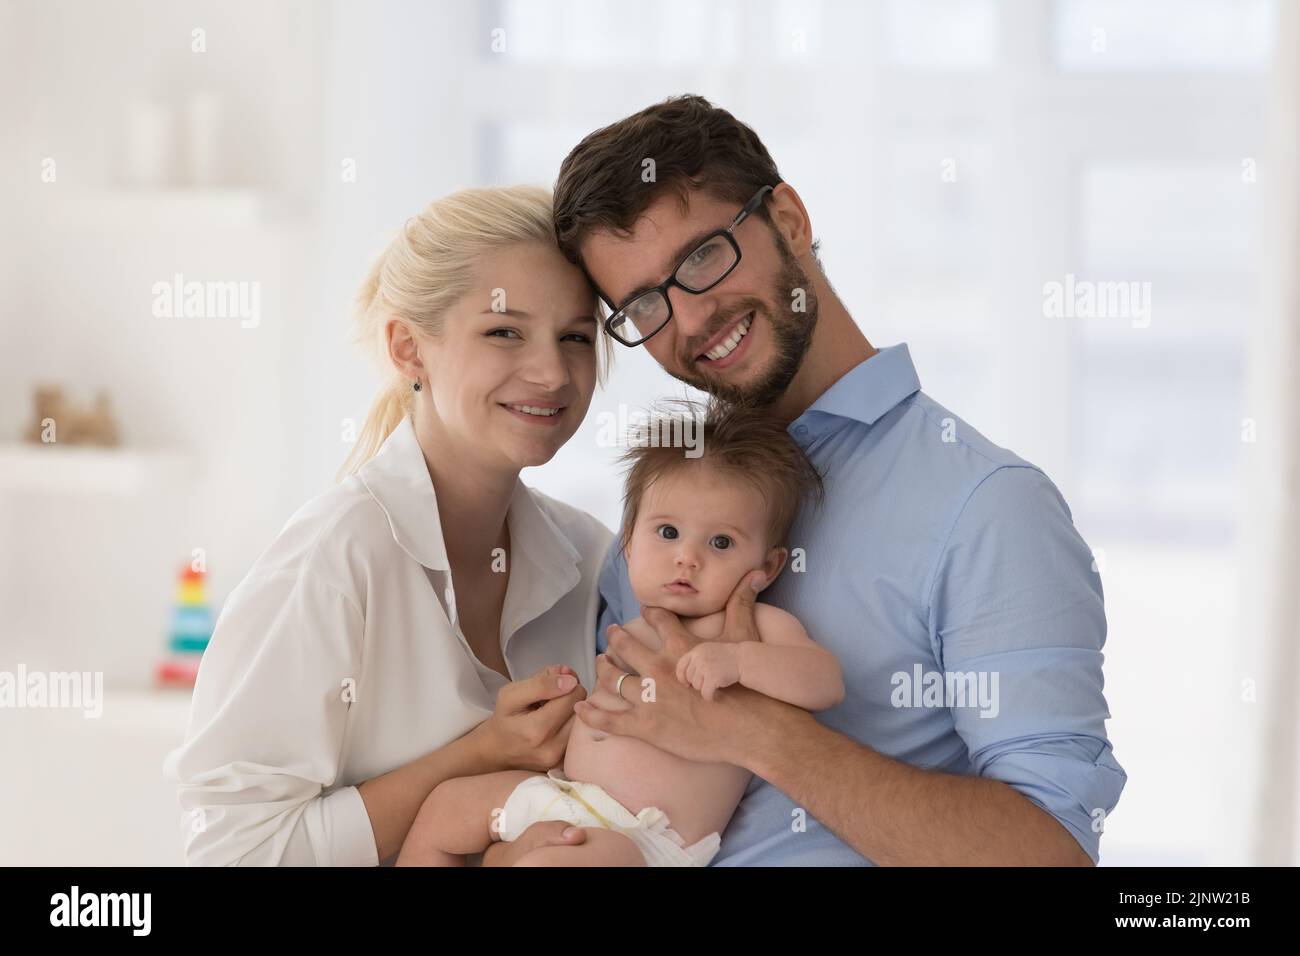 Portrait of loving parents and newborn staring at camera Stock Photo